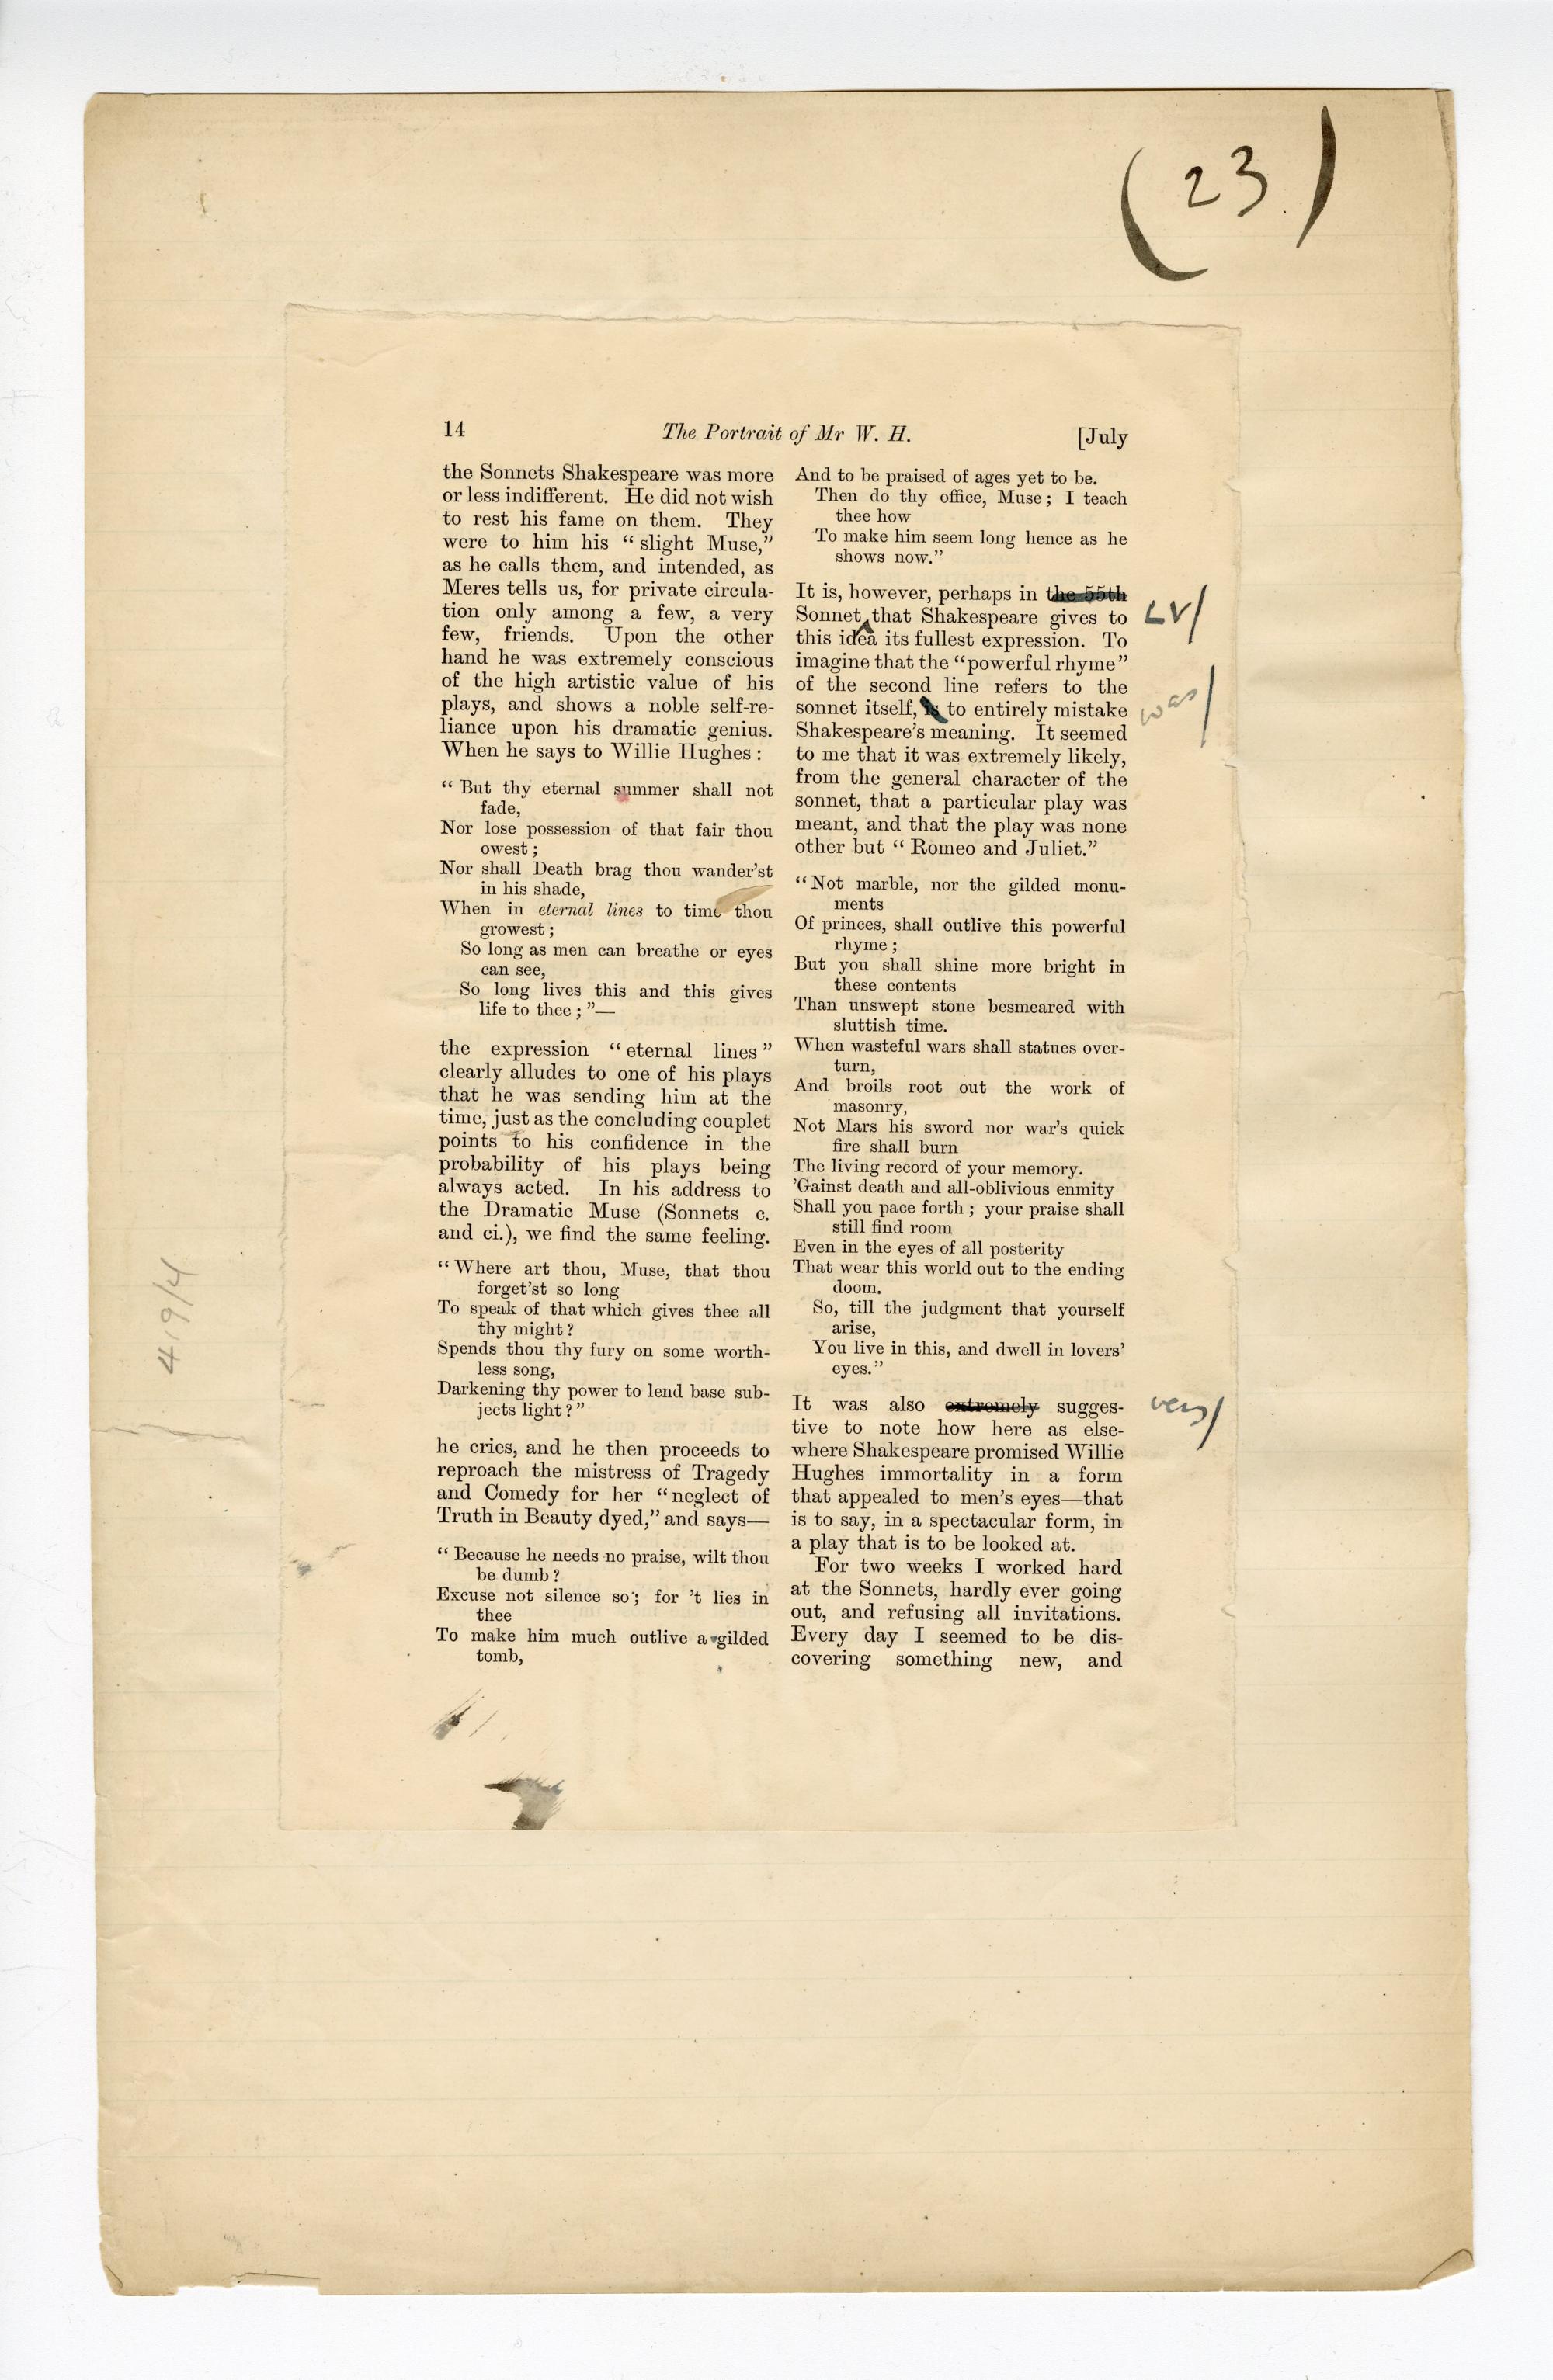 Folio 23 contains a full page (p. 14) from the Blackwood's 1889 printing glued down onto a notebook page. Wilde's annotations are on the Blackwood's page but not on the margins of the page except for the folio number. There is a pencil marking (4/9/4?) in the left hand margin which may not be in Wilde's hand and it is unclear what this marking might refer to.